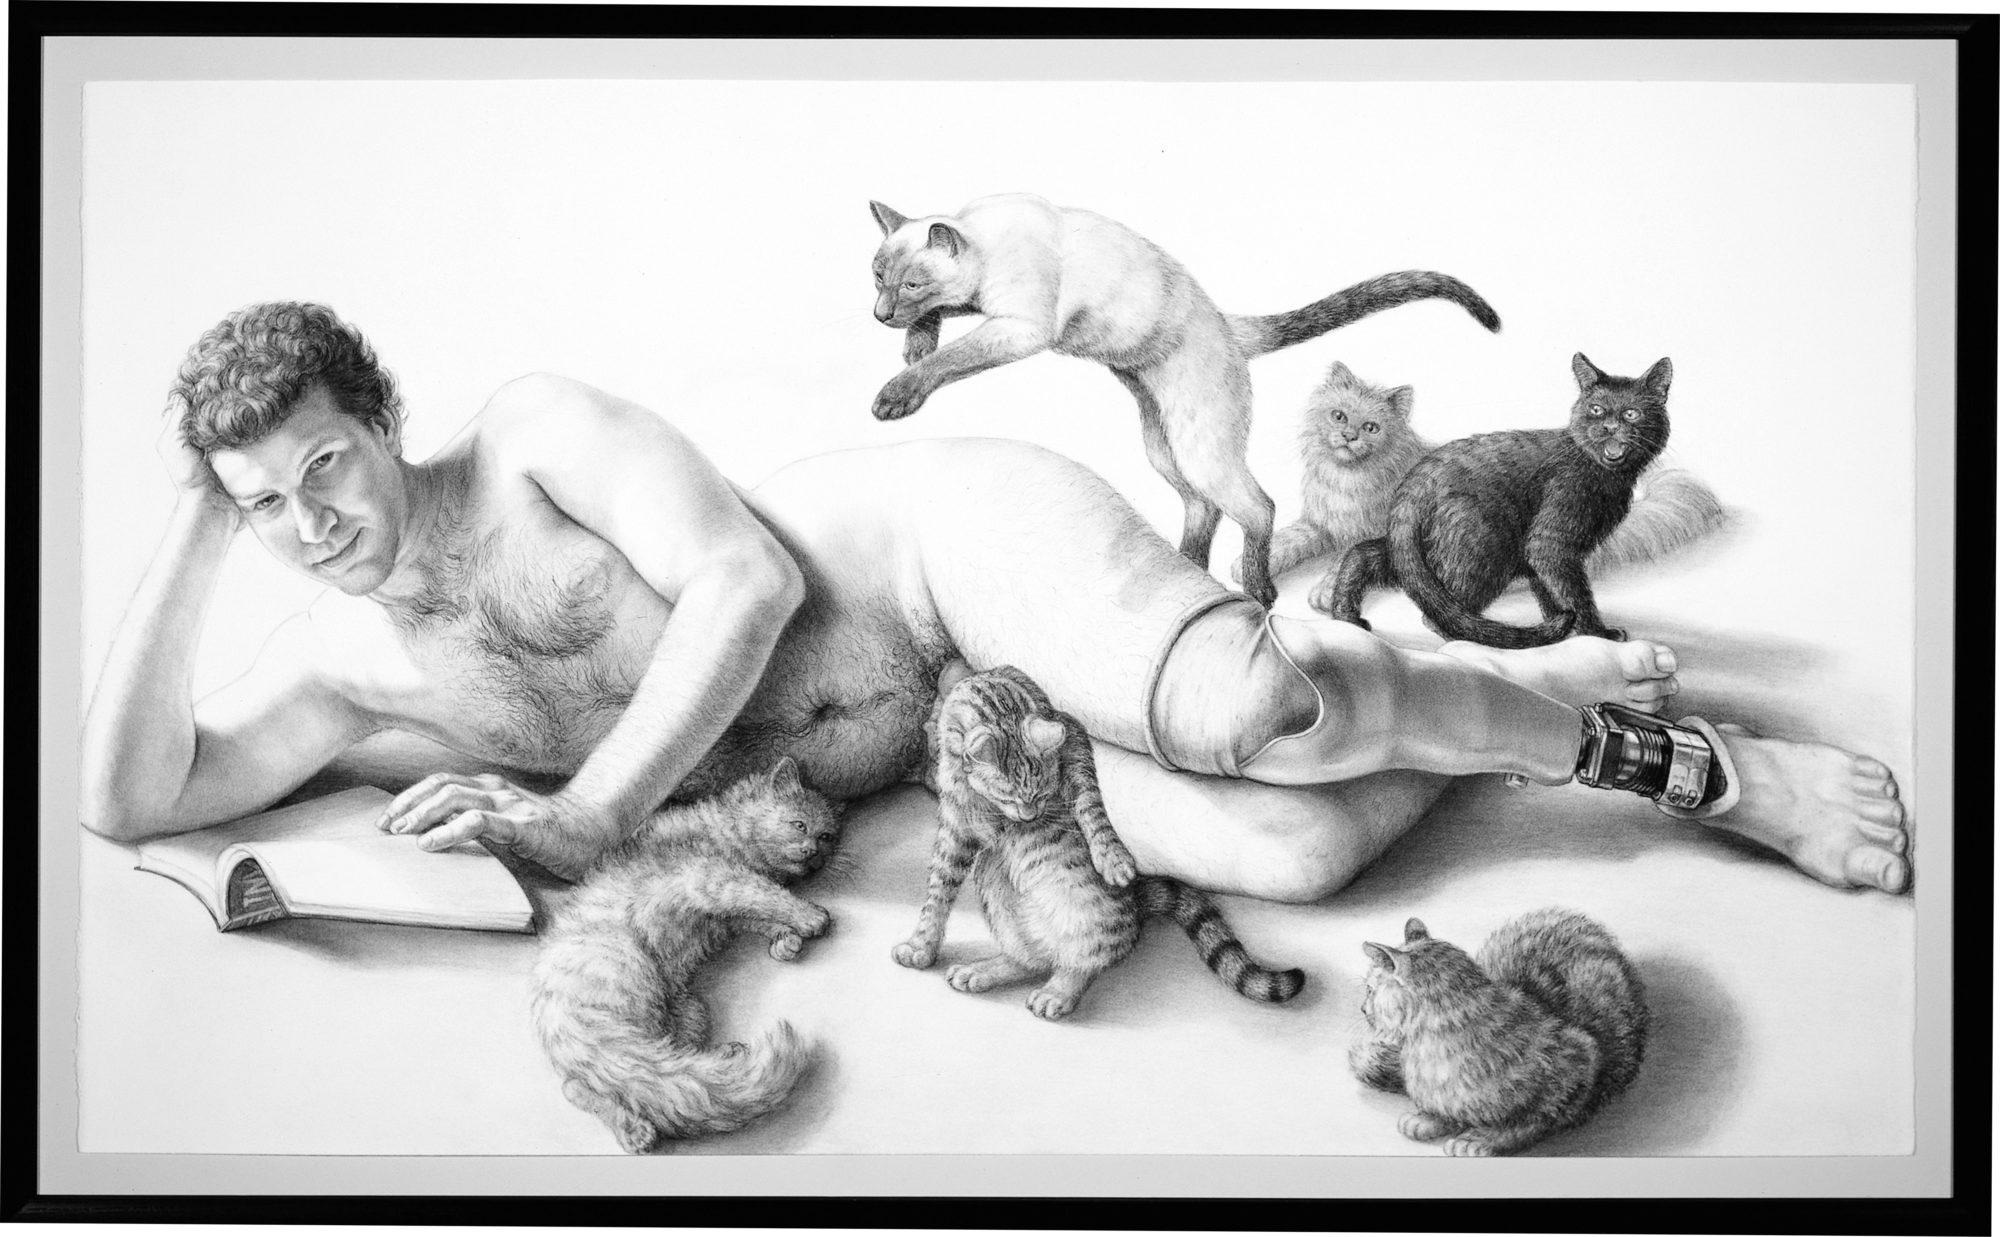 black and white drawing of a nude man with a prosthetic leg posing while lying down with a book open surrounded by six cats with different expressions